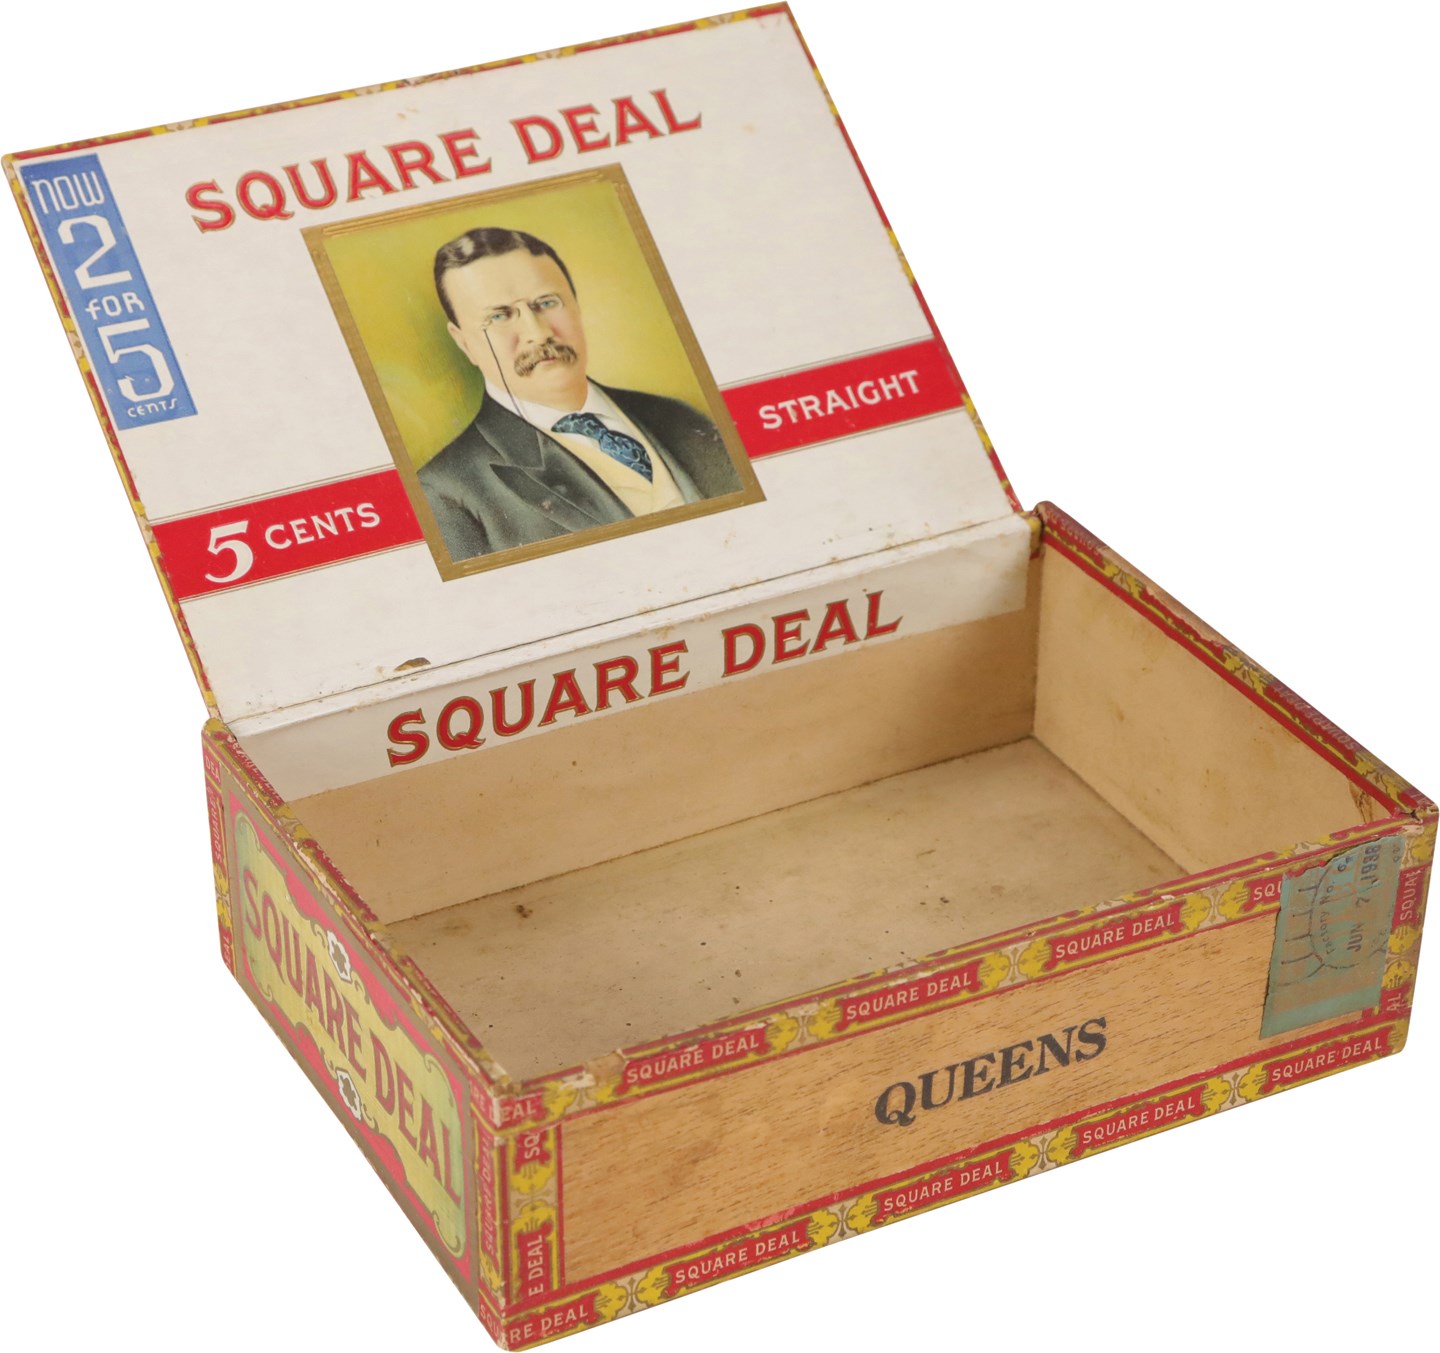 Rock And Pop Culture - Rare and Amazing Square Deal Teddy Roosevelt Cigar Box